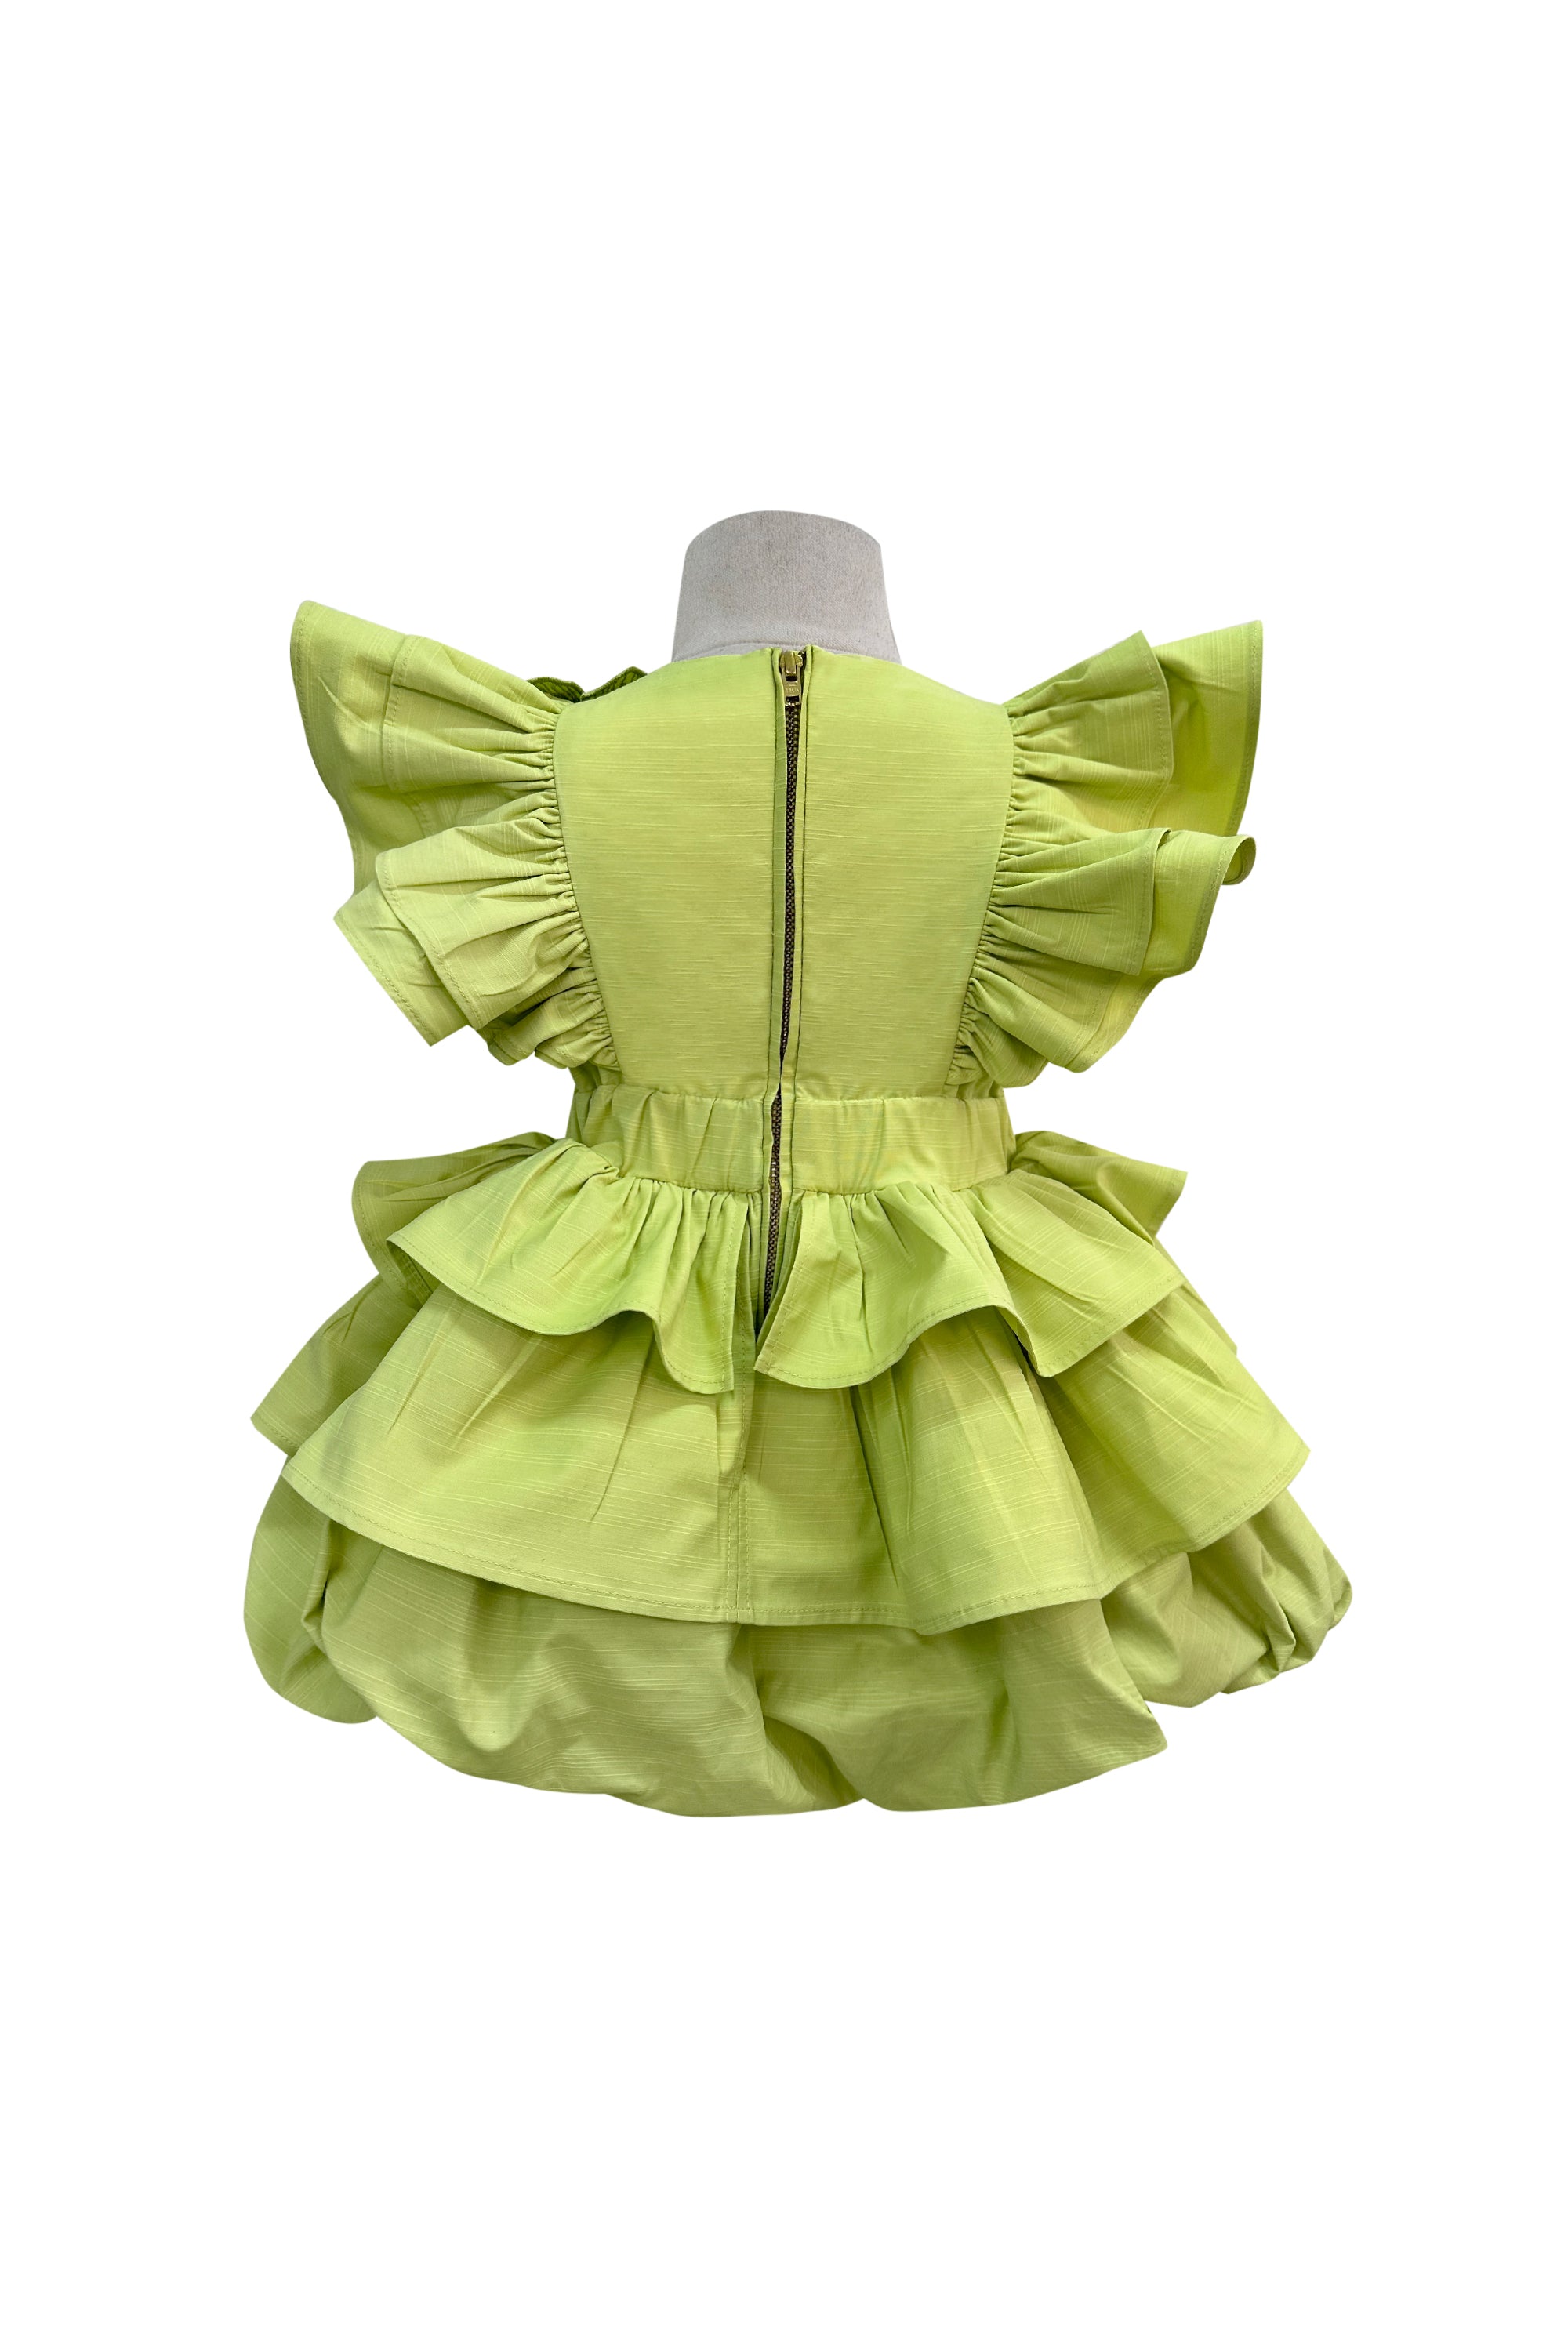 The Melody Dress (Lime Green)